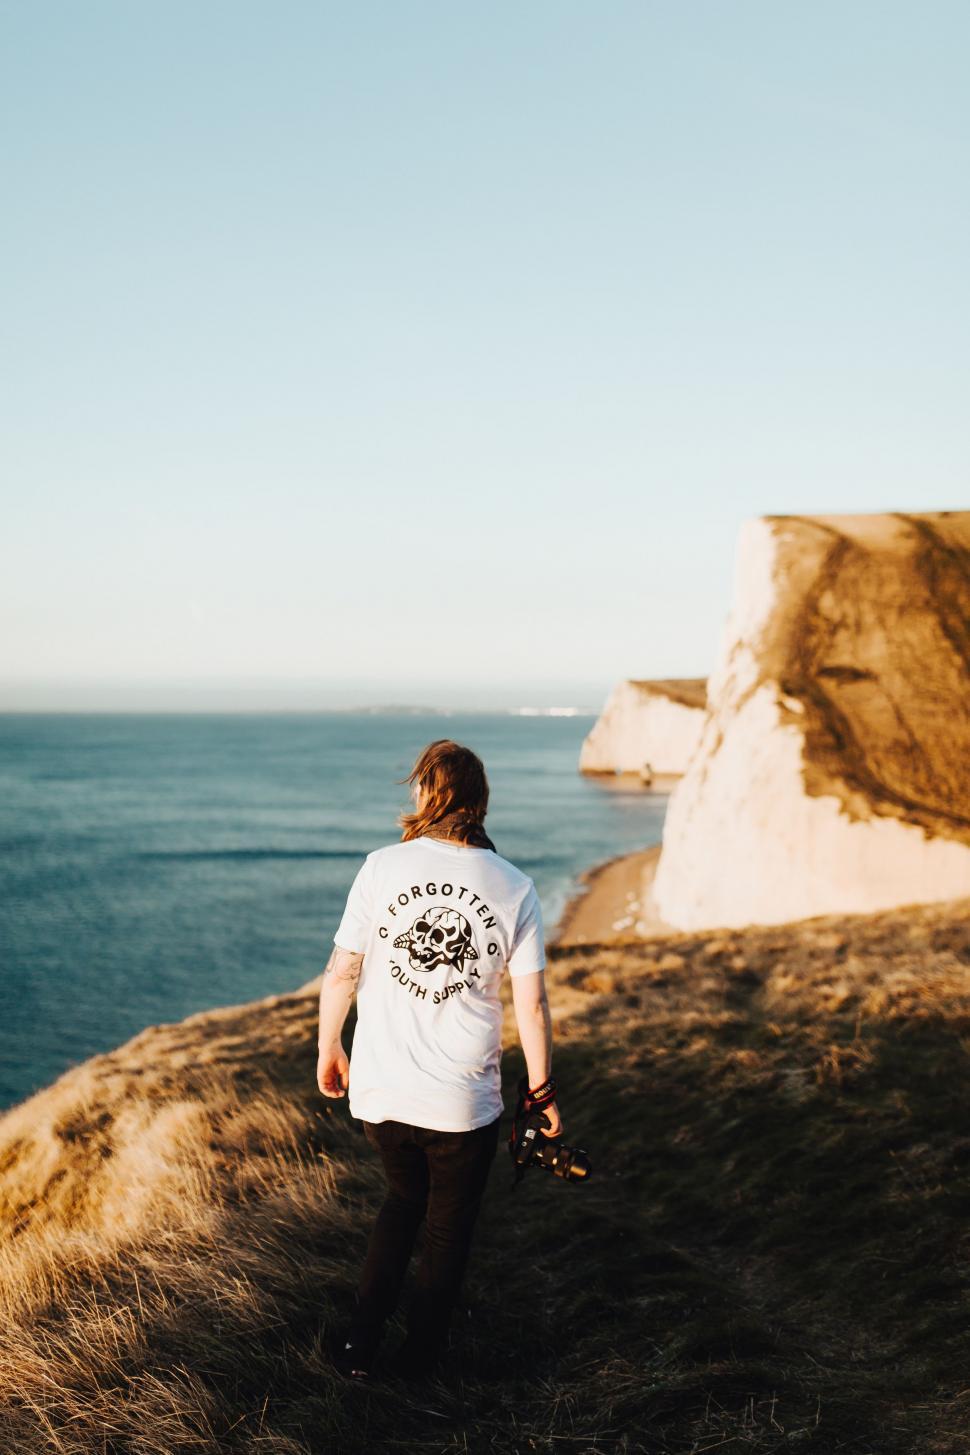 Free Image of Man Walking Up a Hill Towards the Ocean 